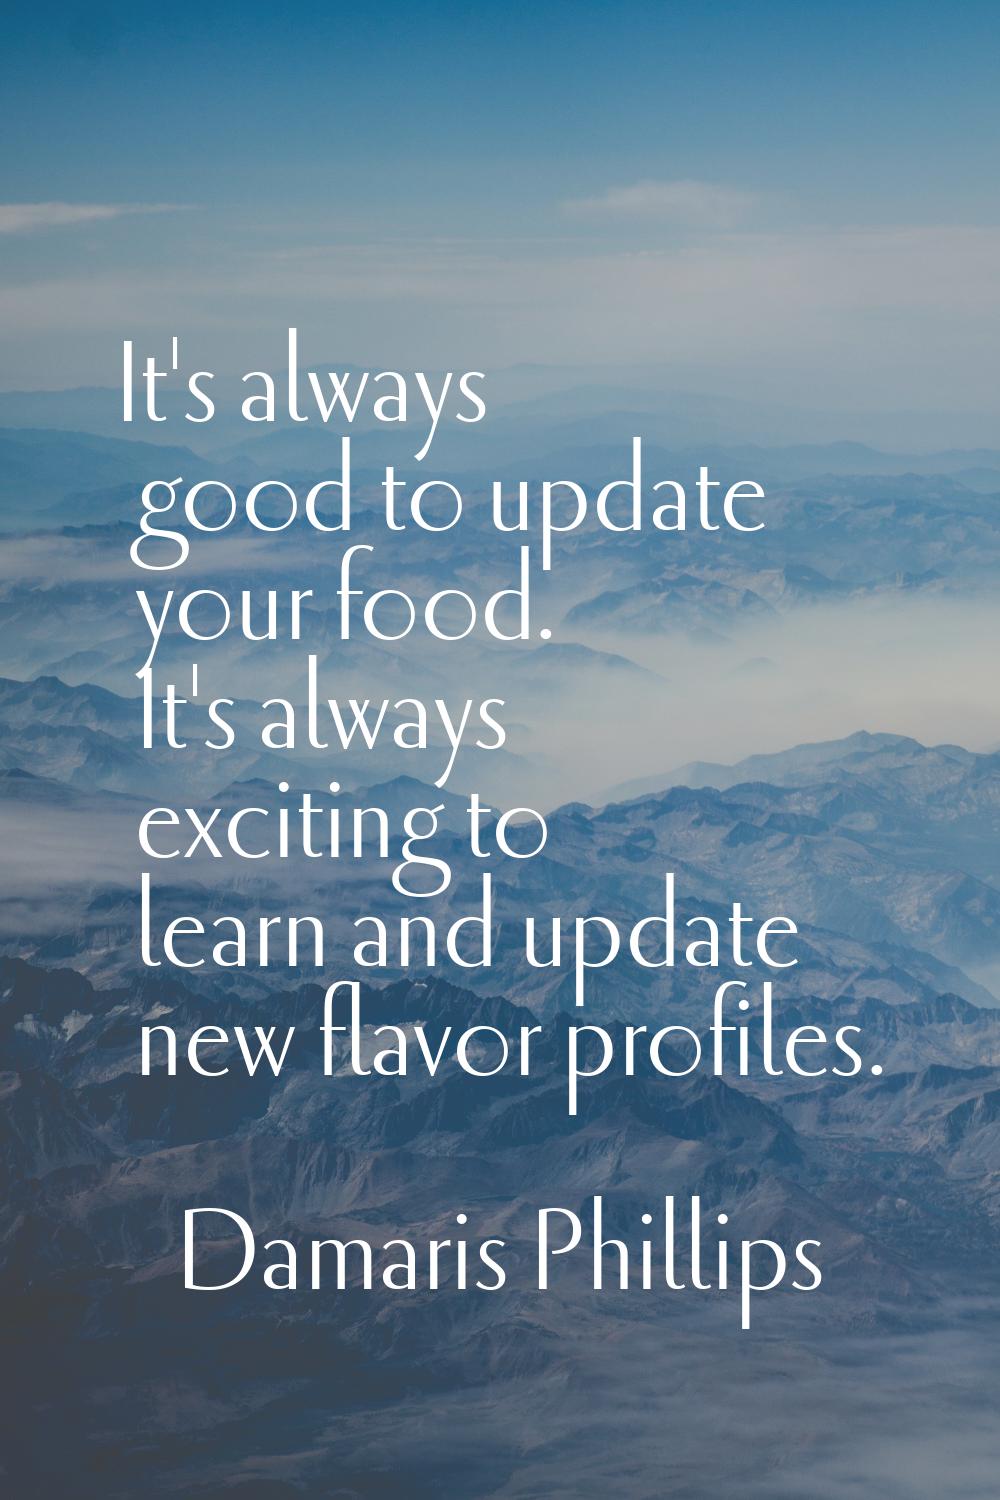 It's always good to update your food. It's always exciting to learn and update new flavor profiles.